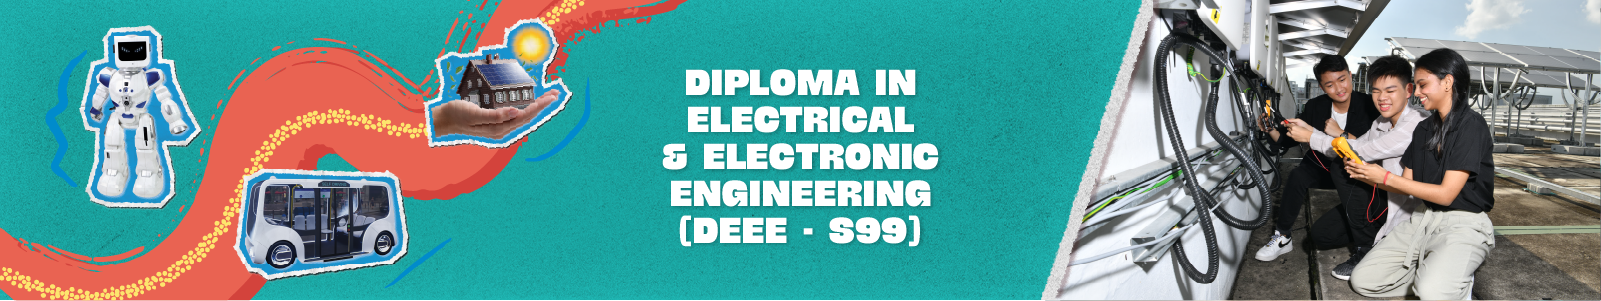 Diploma in Electrical & Electronic Engineering